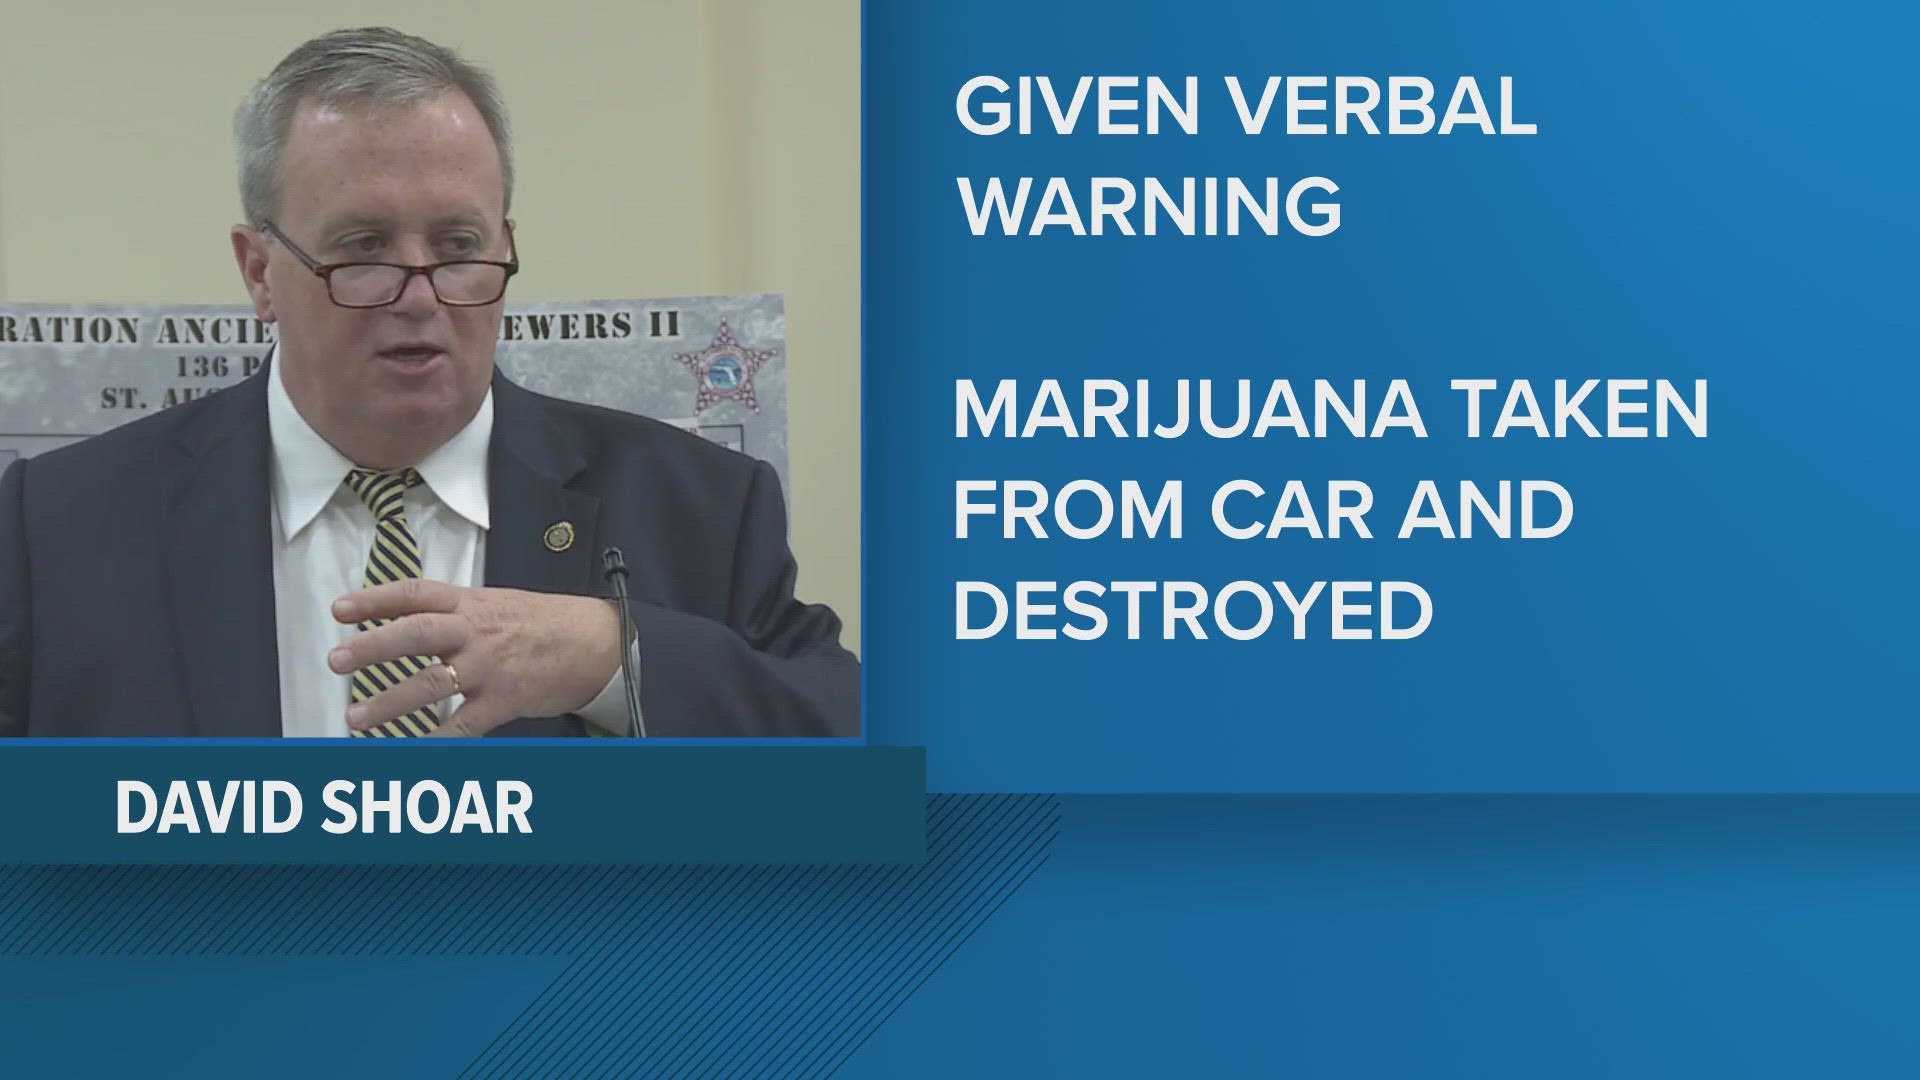 David Shoar had a valid Medical Marijuana License, however, the substance was not in its original packaging and "had been used inside the vehicle," a report states.